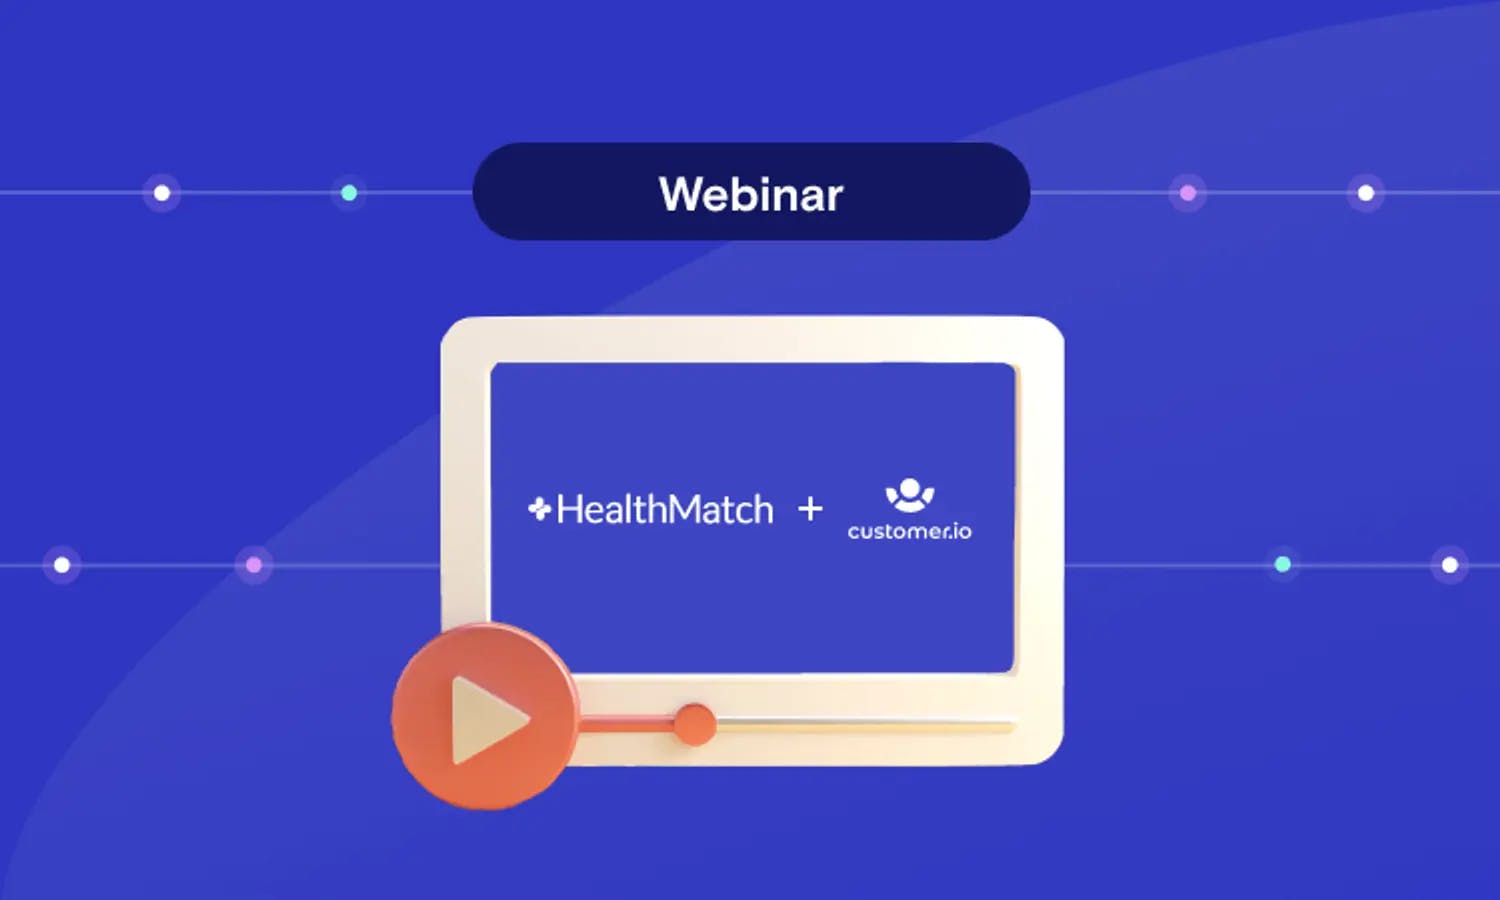 How HealthMatch.io Used Customer.io and RudderStack to Launch Their New Business Model in 24 Hours